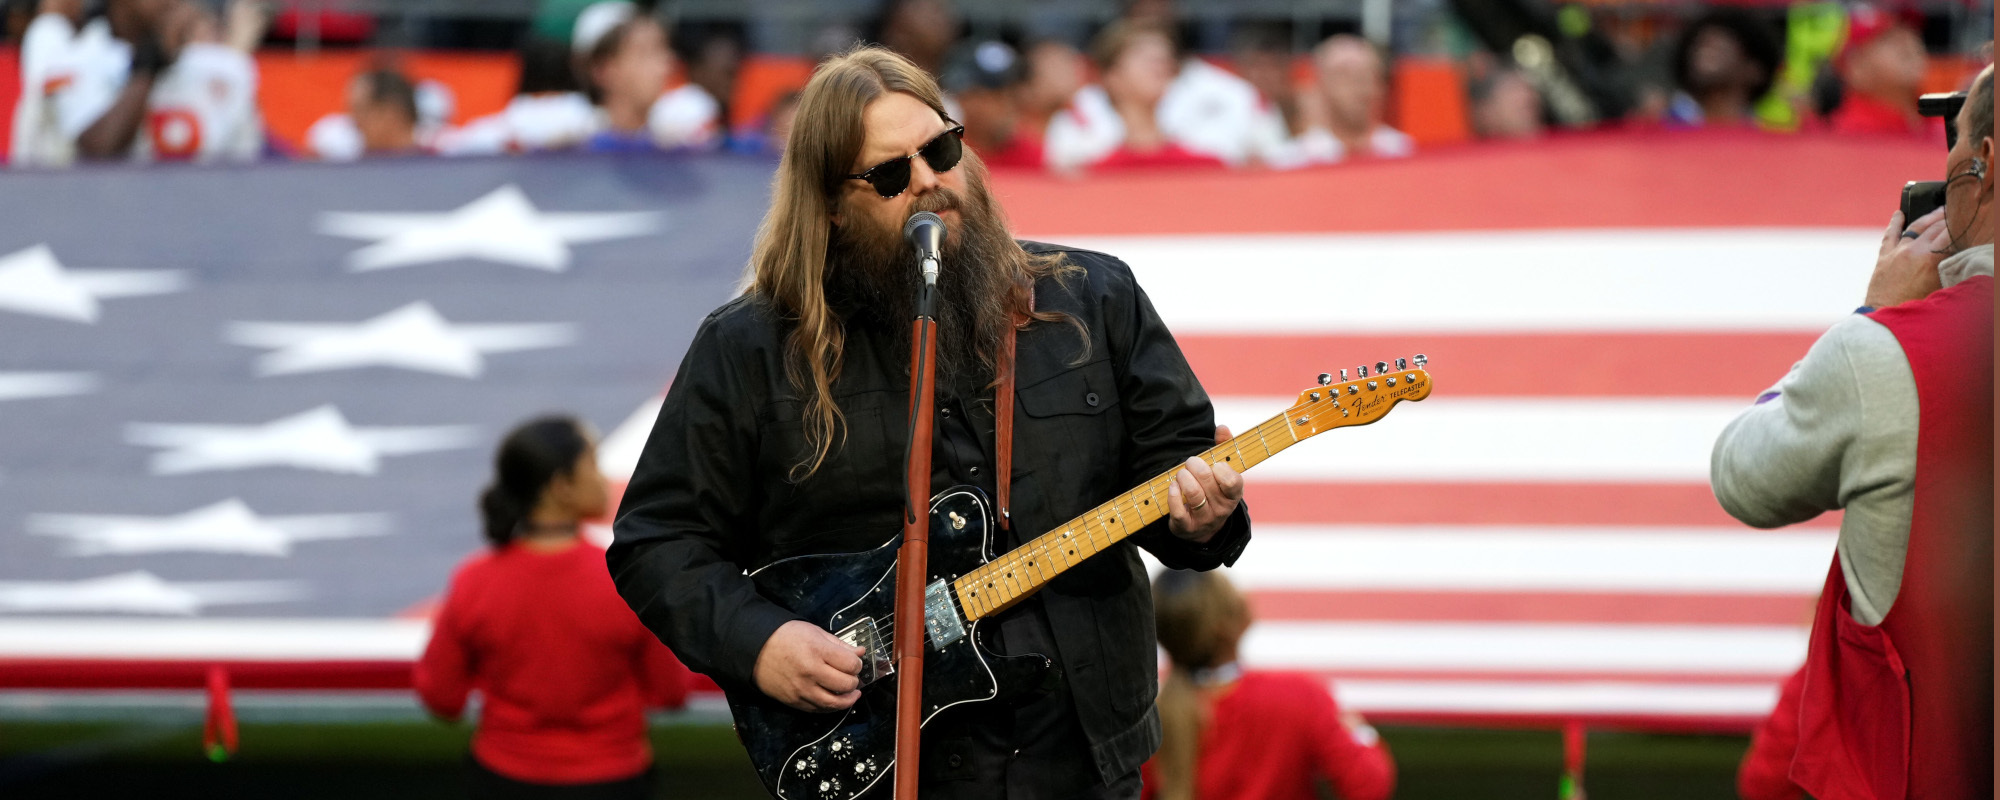 Watch: Chris Stapleton Wows with National Anthem at Super Bowl LVII